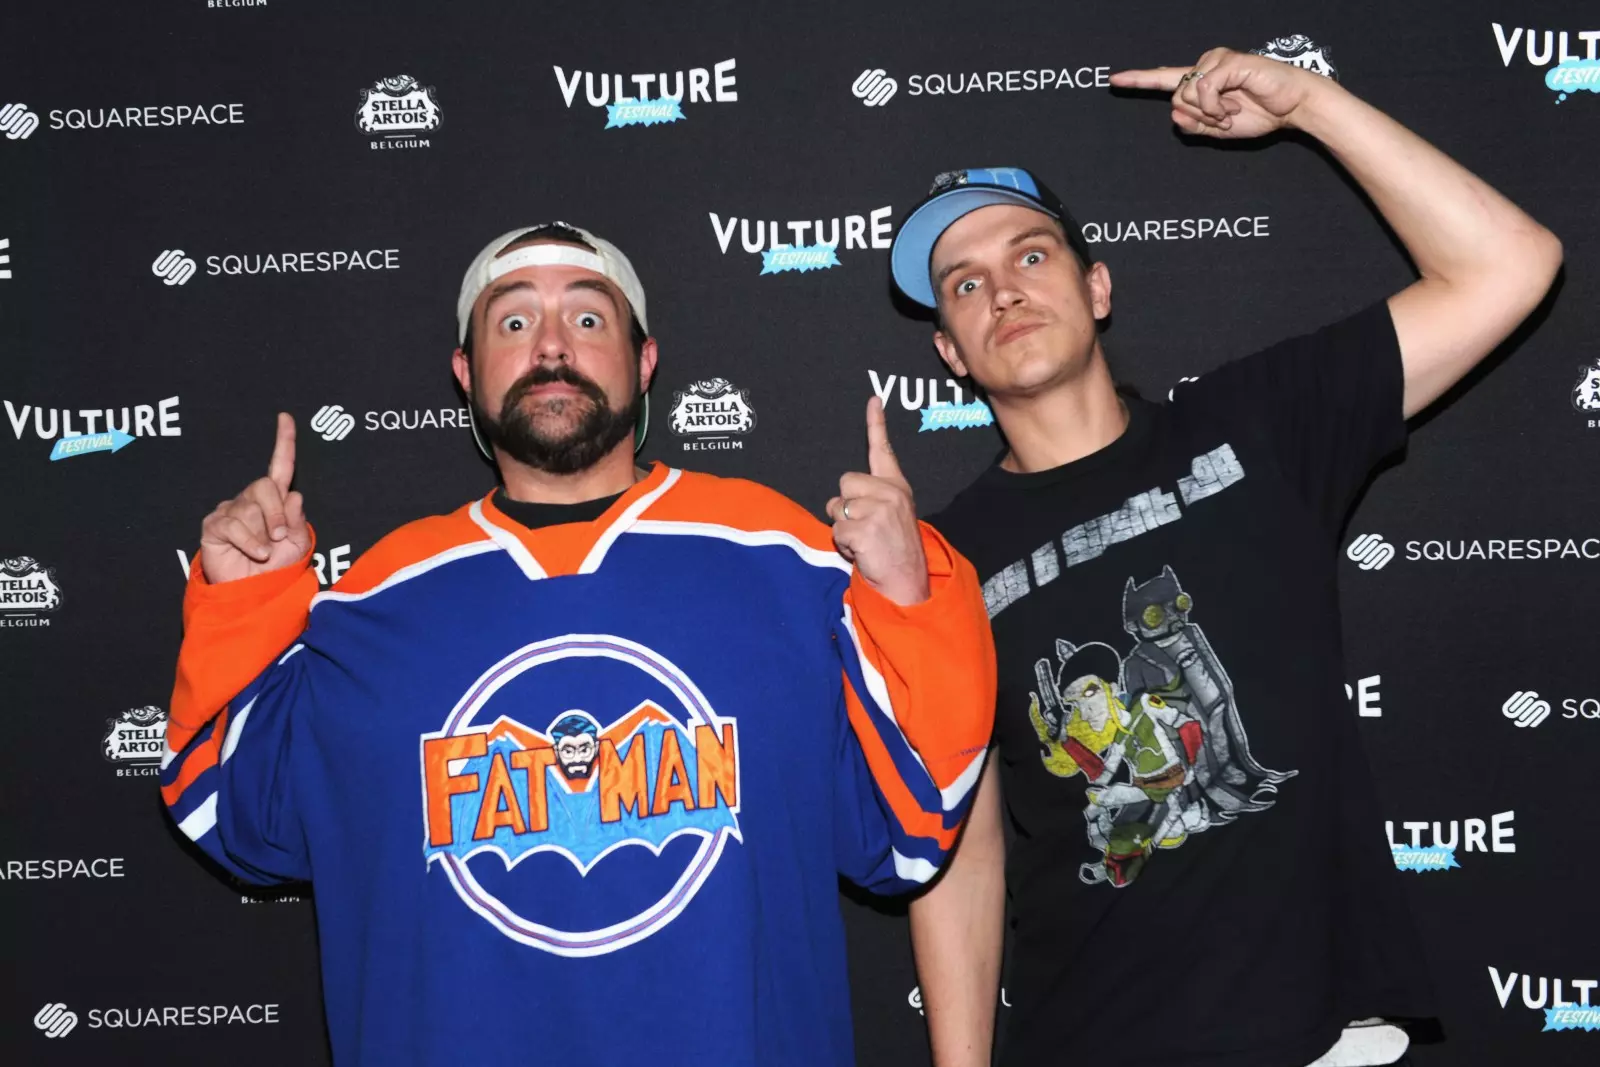 NJ filmmaker Kevin Smith's comic art collection up for auction